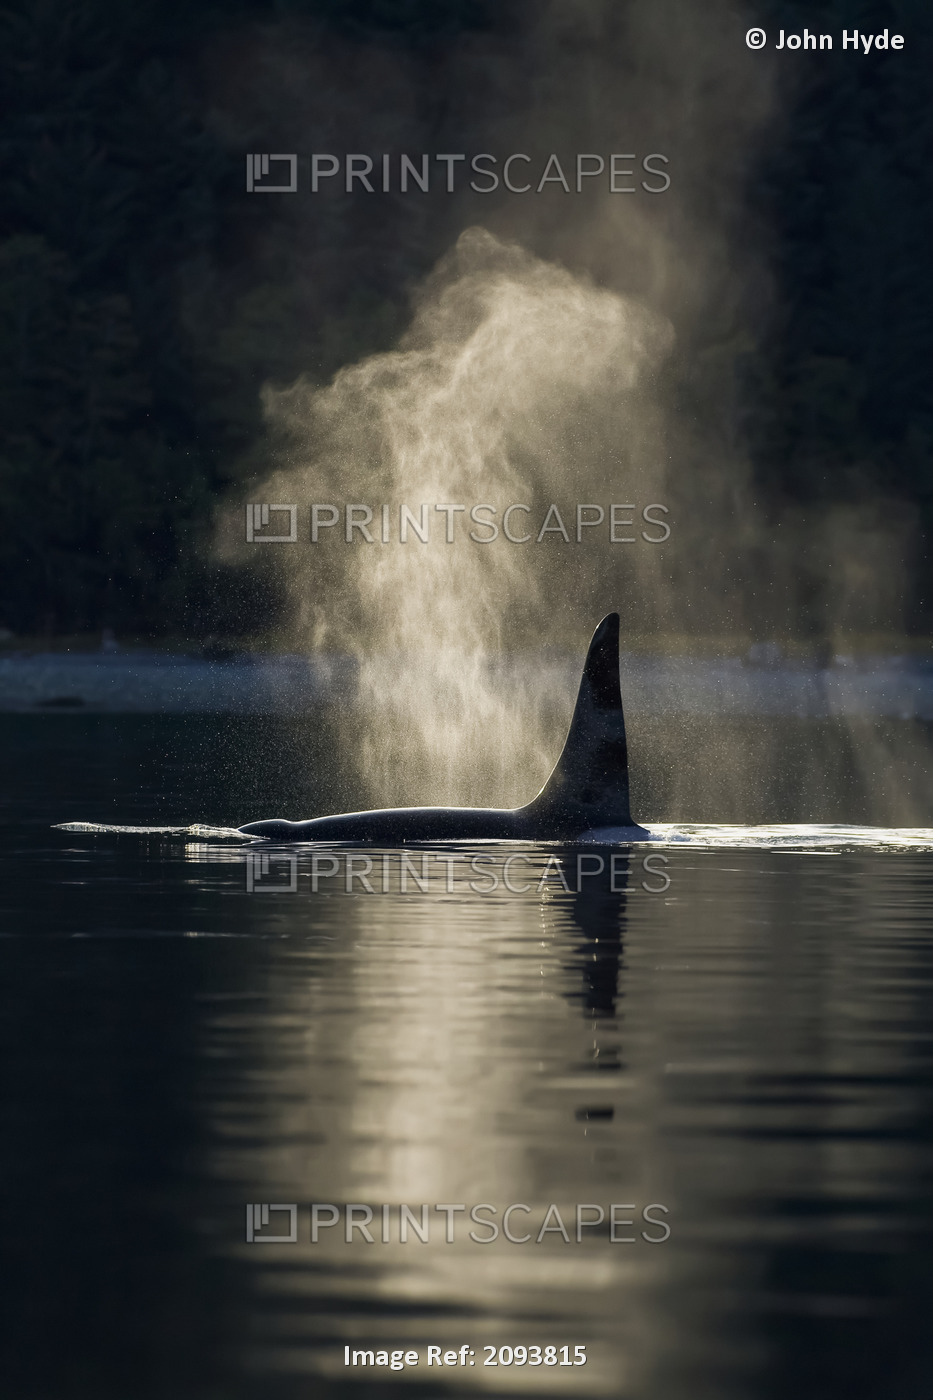 An Orca Whale Exhales (Blows) As It Surfaces In Alaska's Inside Passage, ...